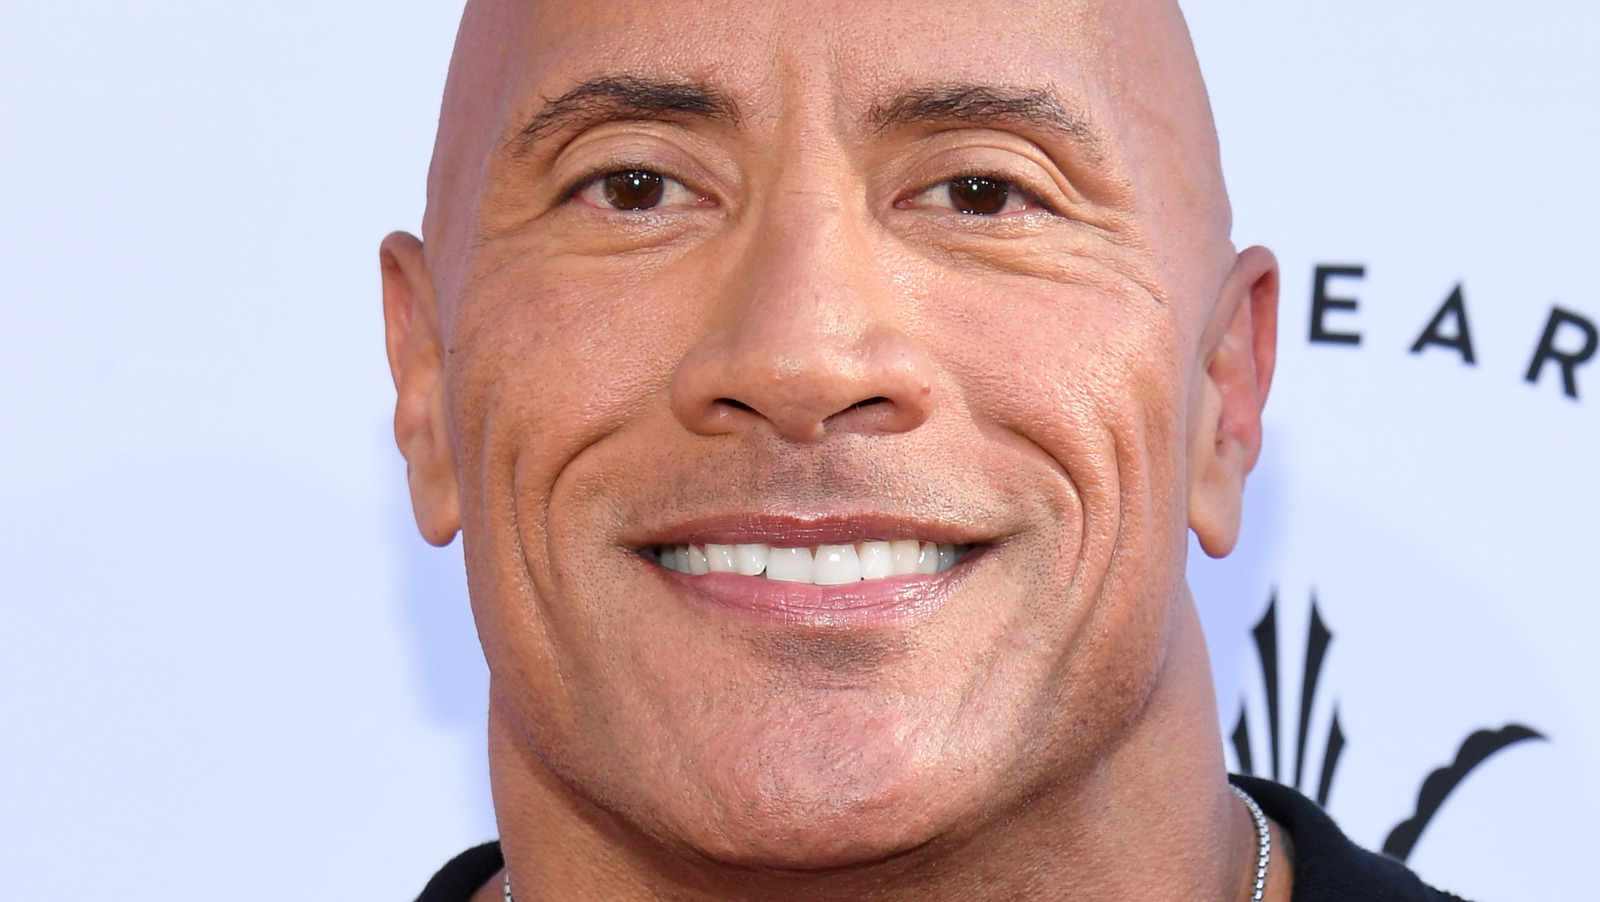 Comment if you can do the People's Eyebrow like @therock #WWE #fory, Eye Brow